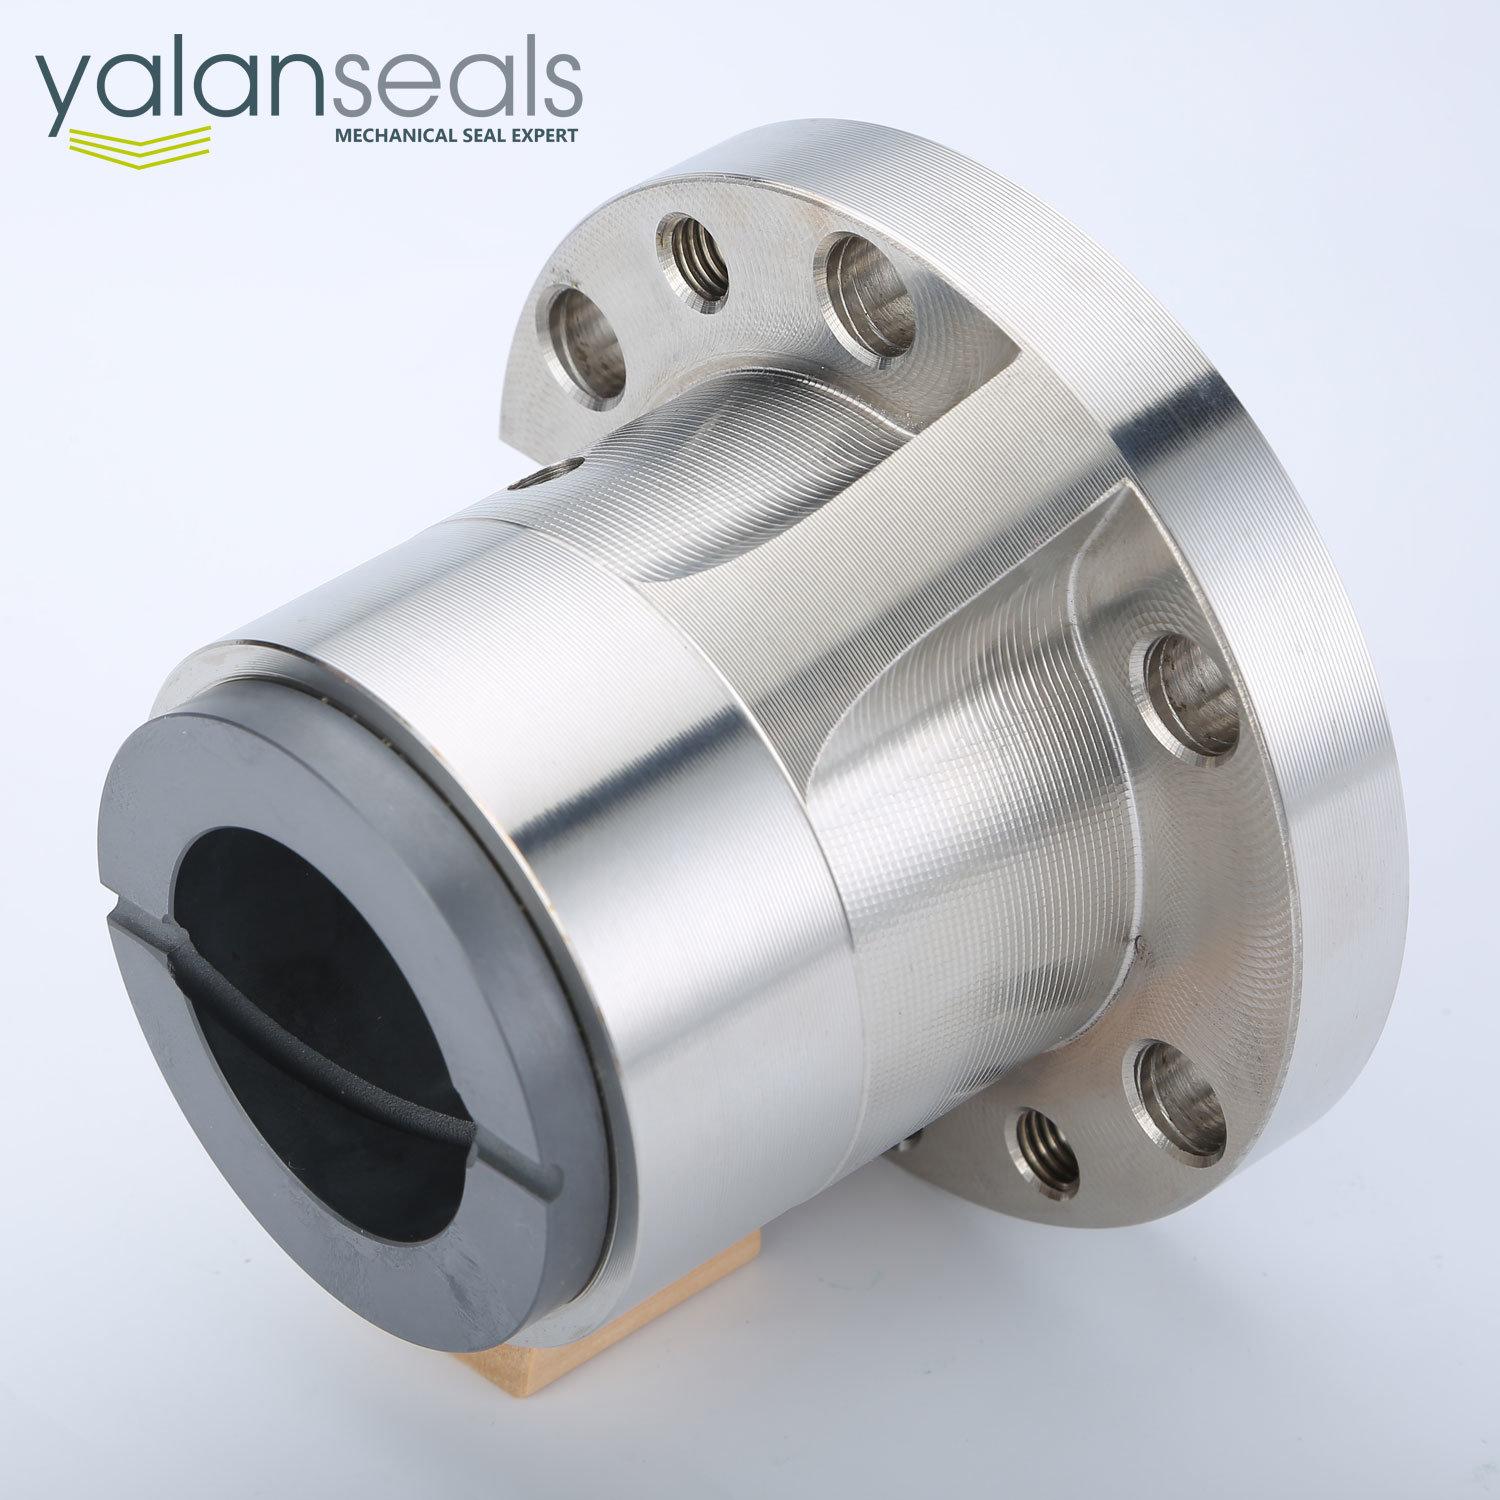 YALAN PB01 and PB02 Shaft Sleeve and Bearing Cartridge Component for Canned Motor Pumps